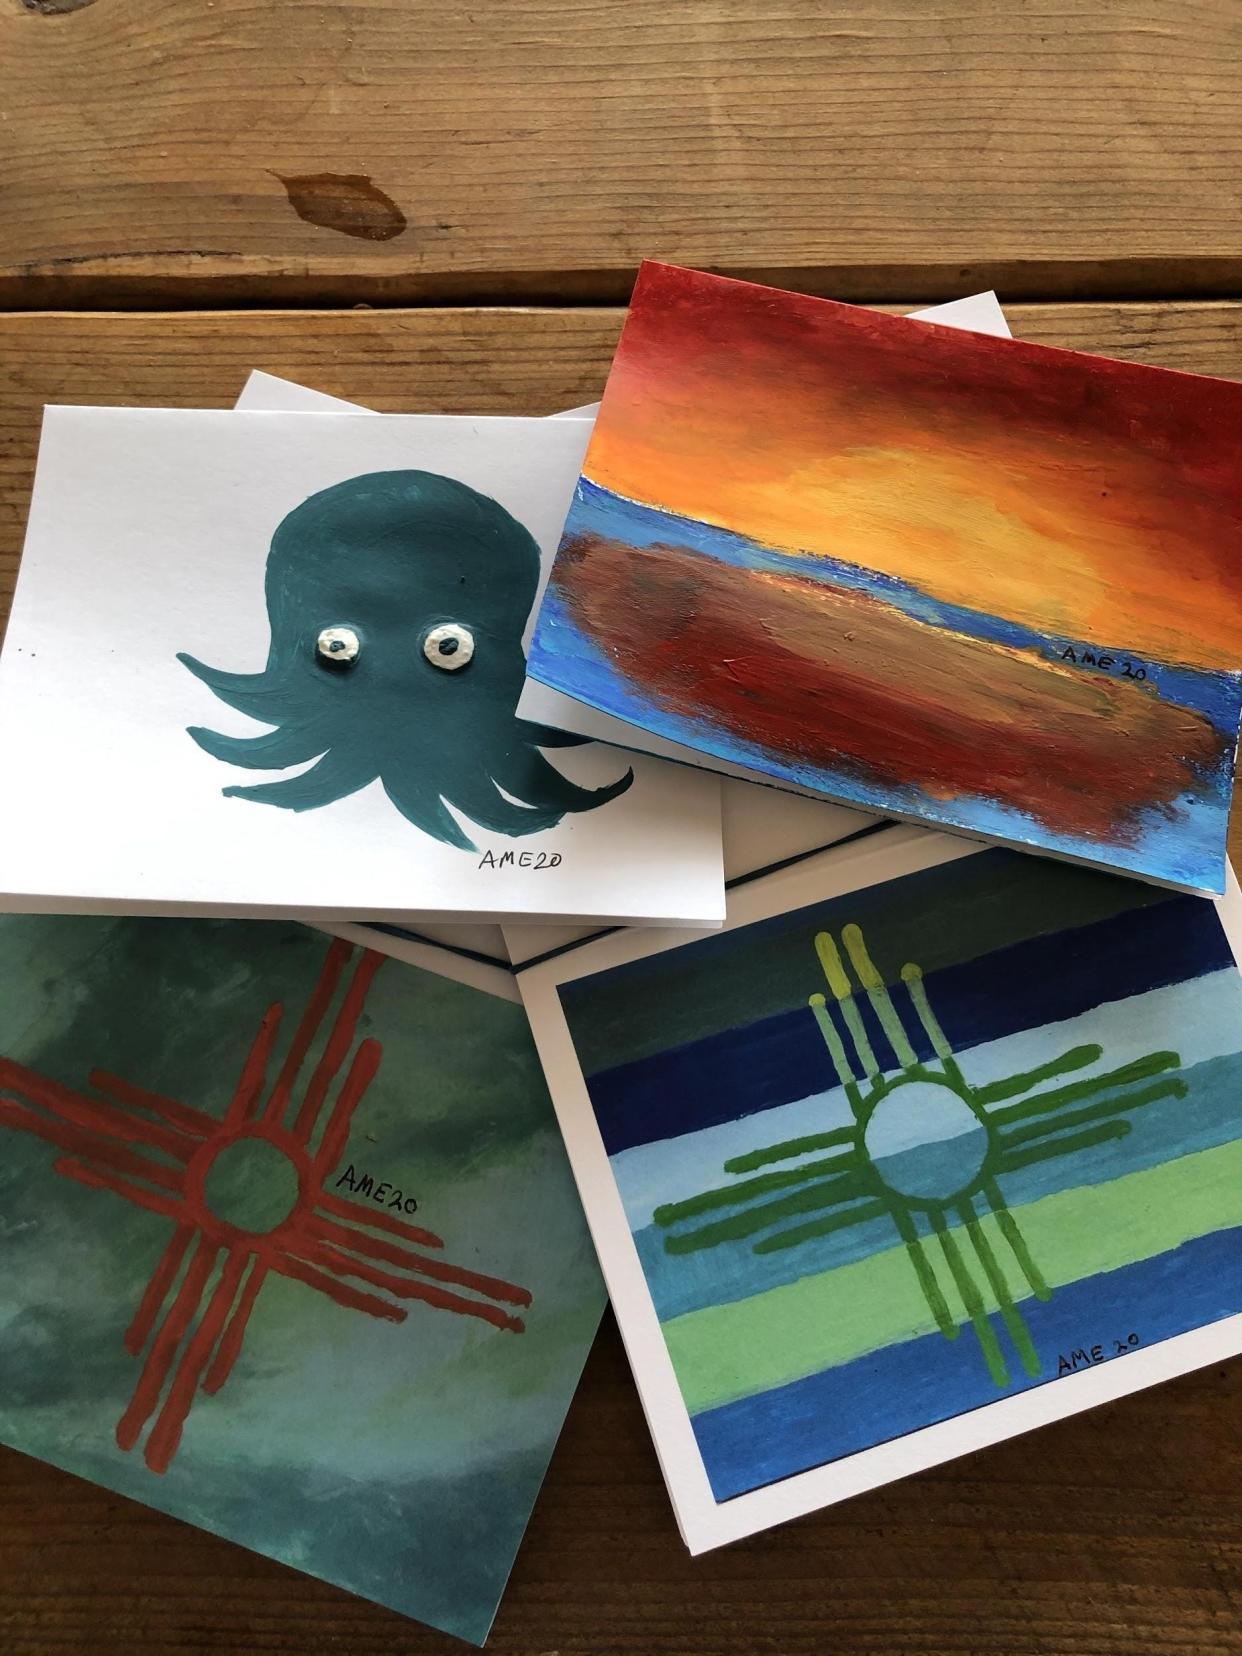 A collection of hand-painted card made by Anelise Elmquist for her business, Art for the World.